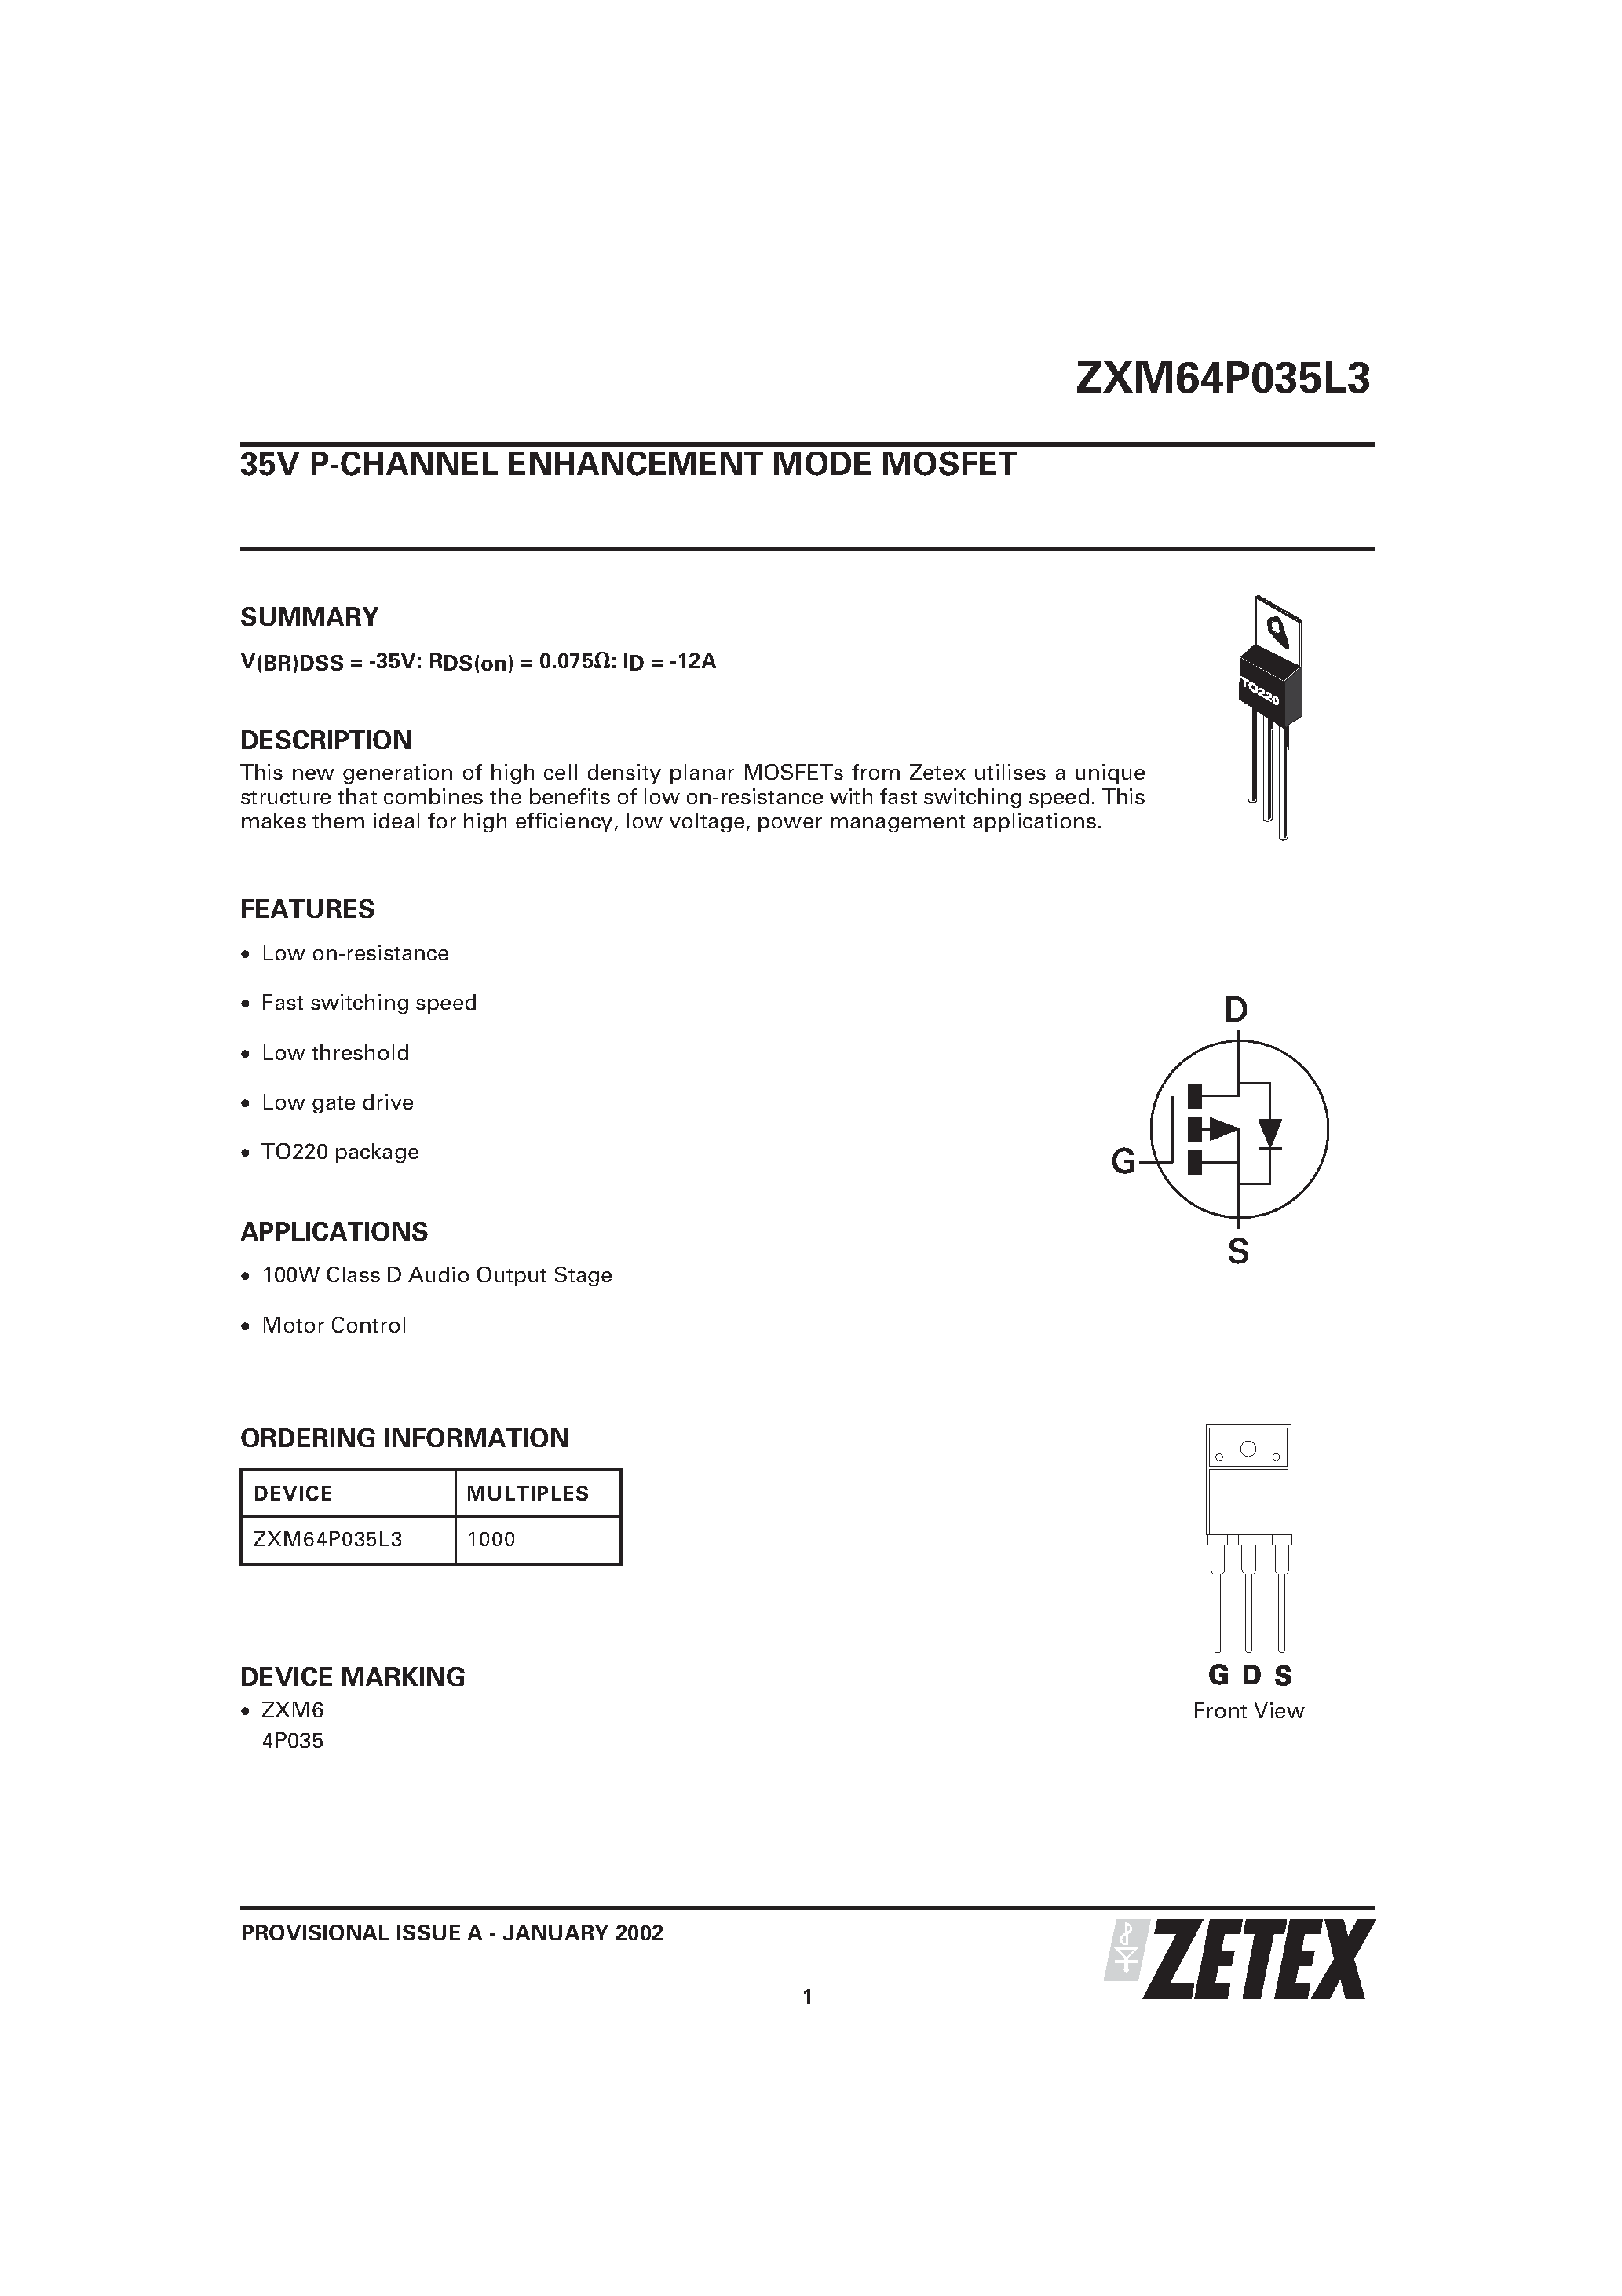 Datasheet ZXM64P03 - 35V P-CHANNEL ENHANCEMENT MODE MOSFET page 1